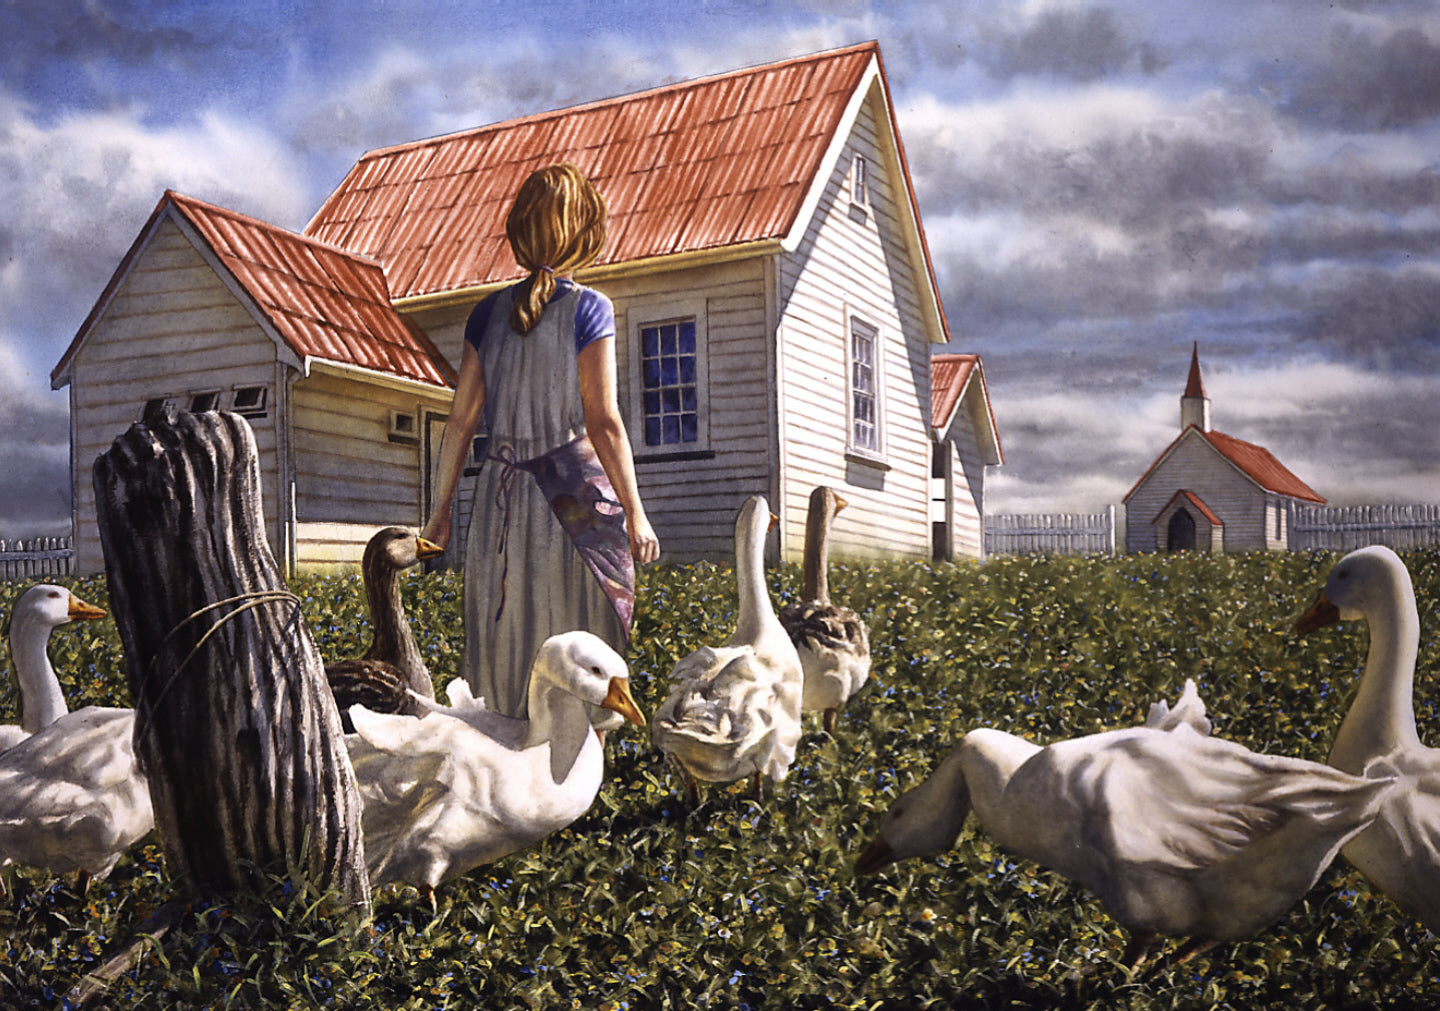 "Geese and Schoolhouse" - Paul Coney